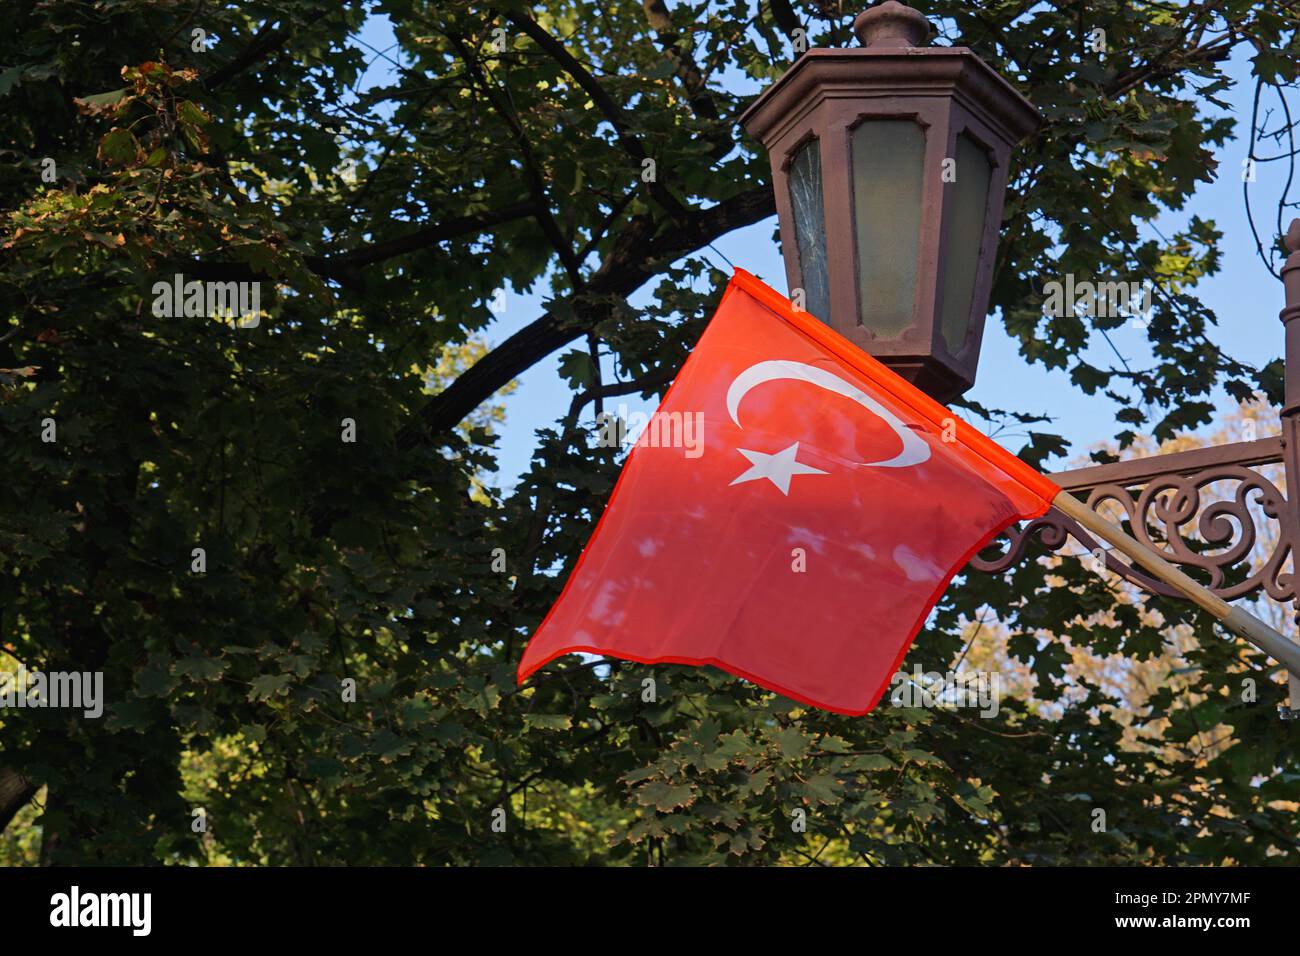 Turkey country flag with star and crescent at city park Stock Photo